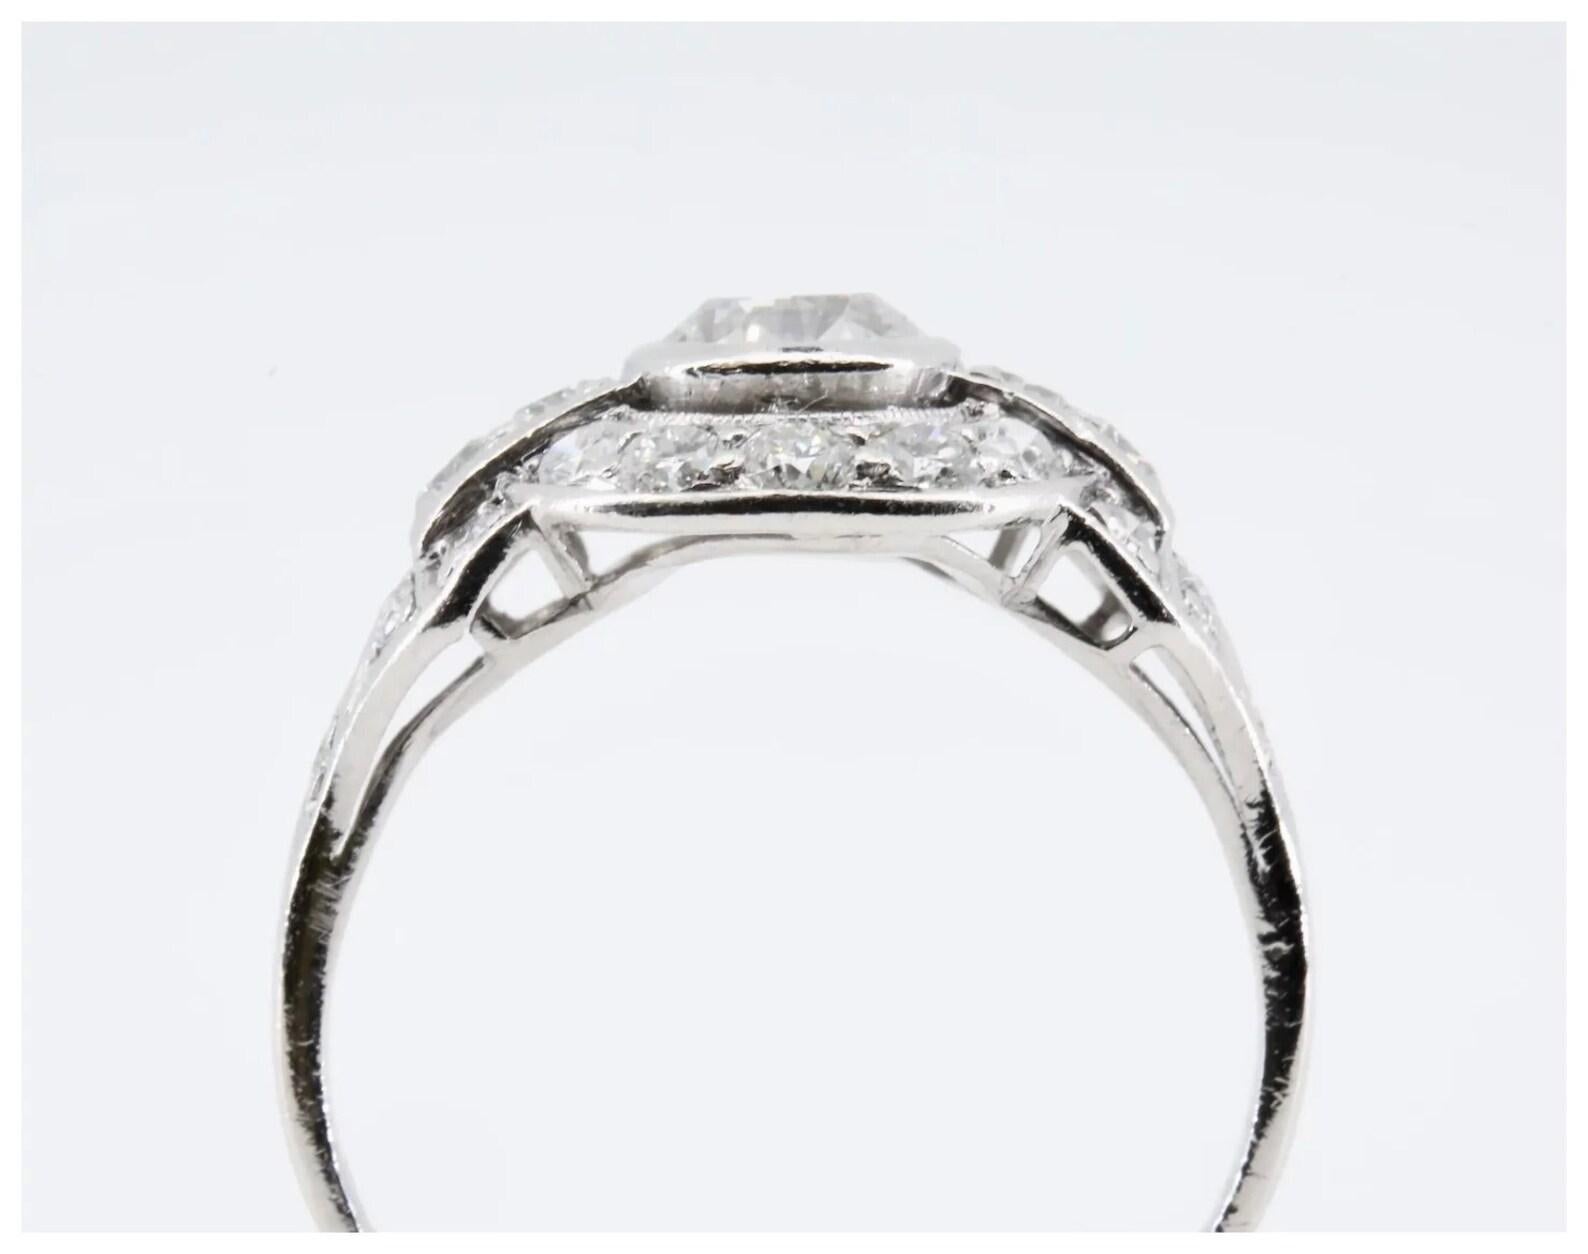 1920's Art Deco 1.46 Ctw Diamond Halo Engagement Ring in Platinum In Good Condition For Sale In Boston, MA